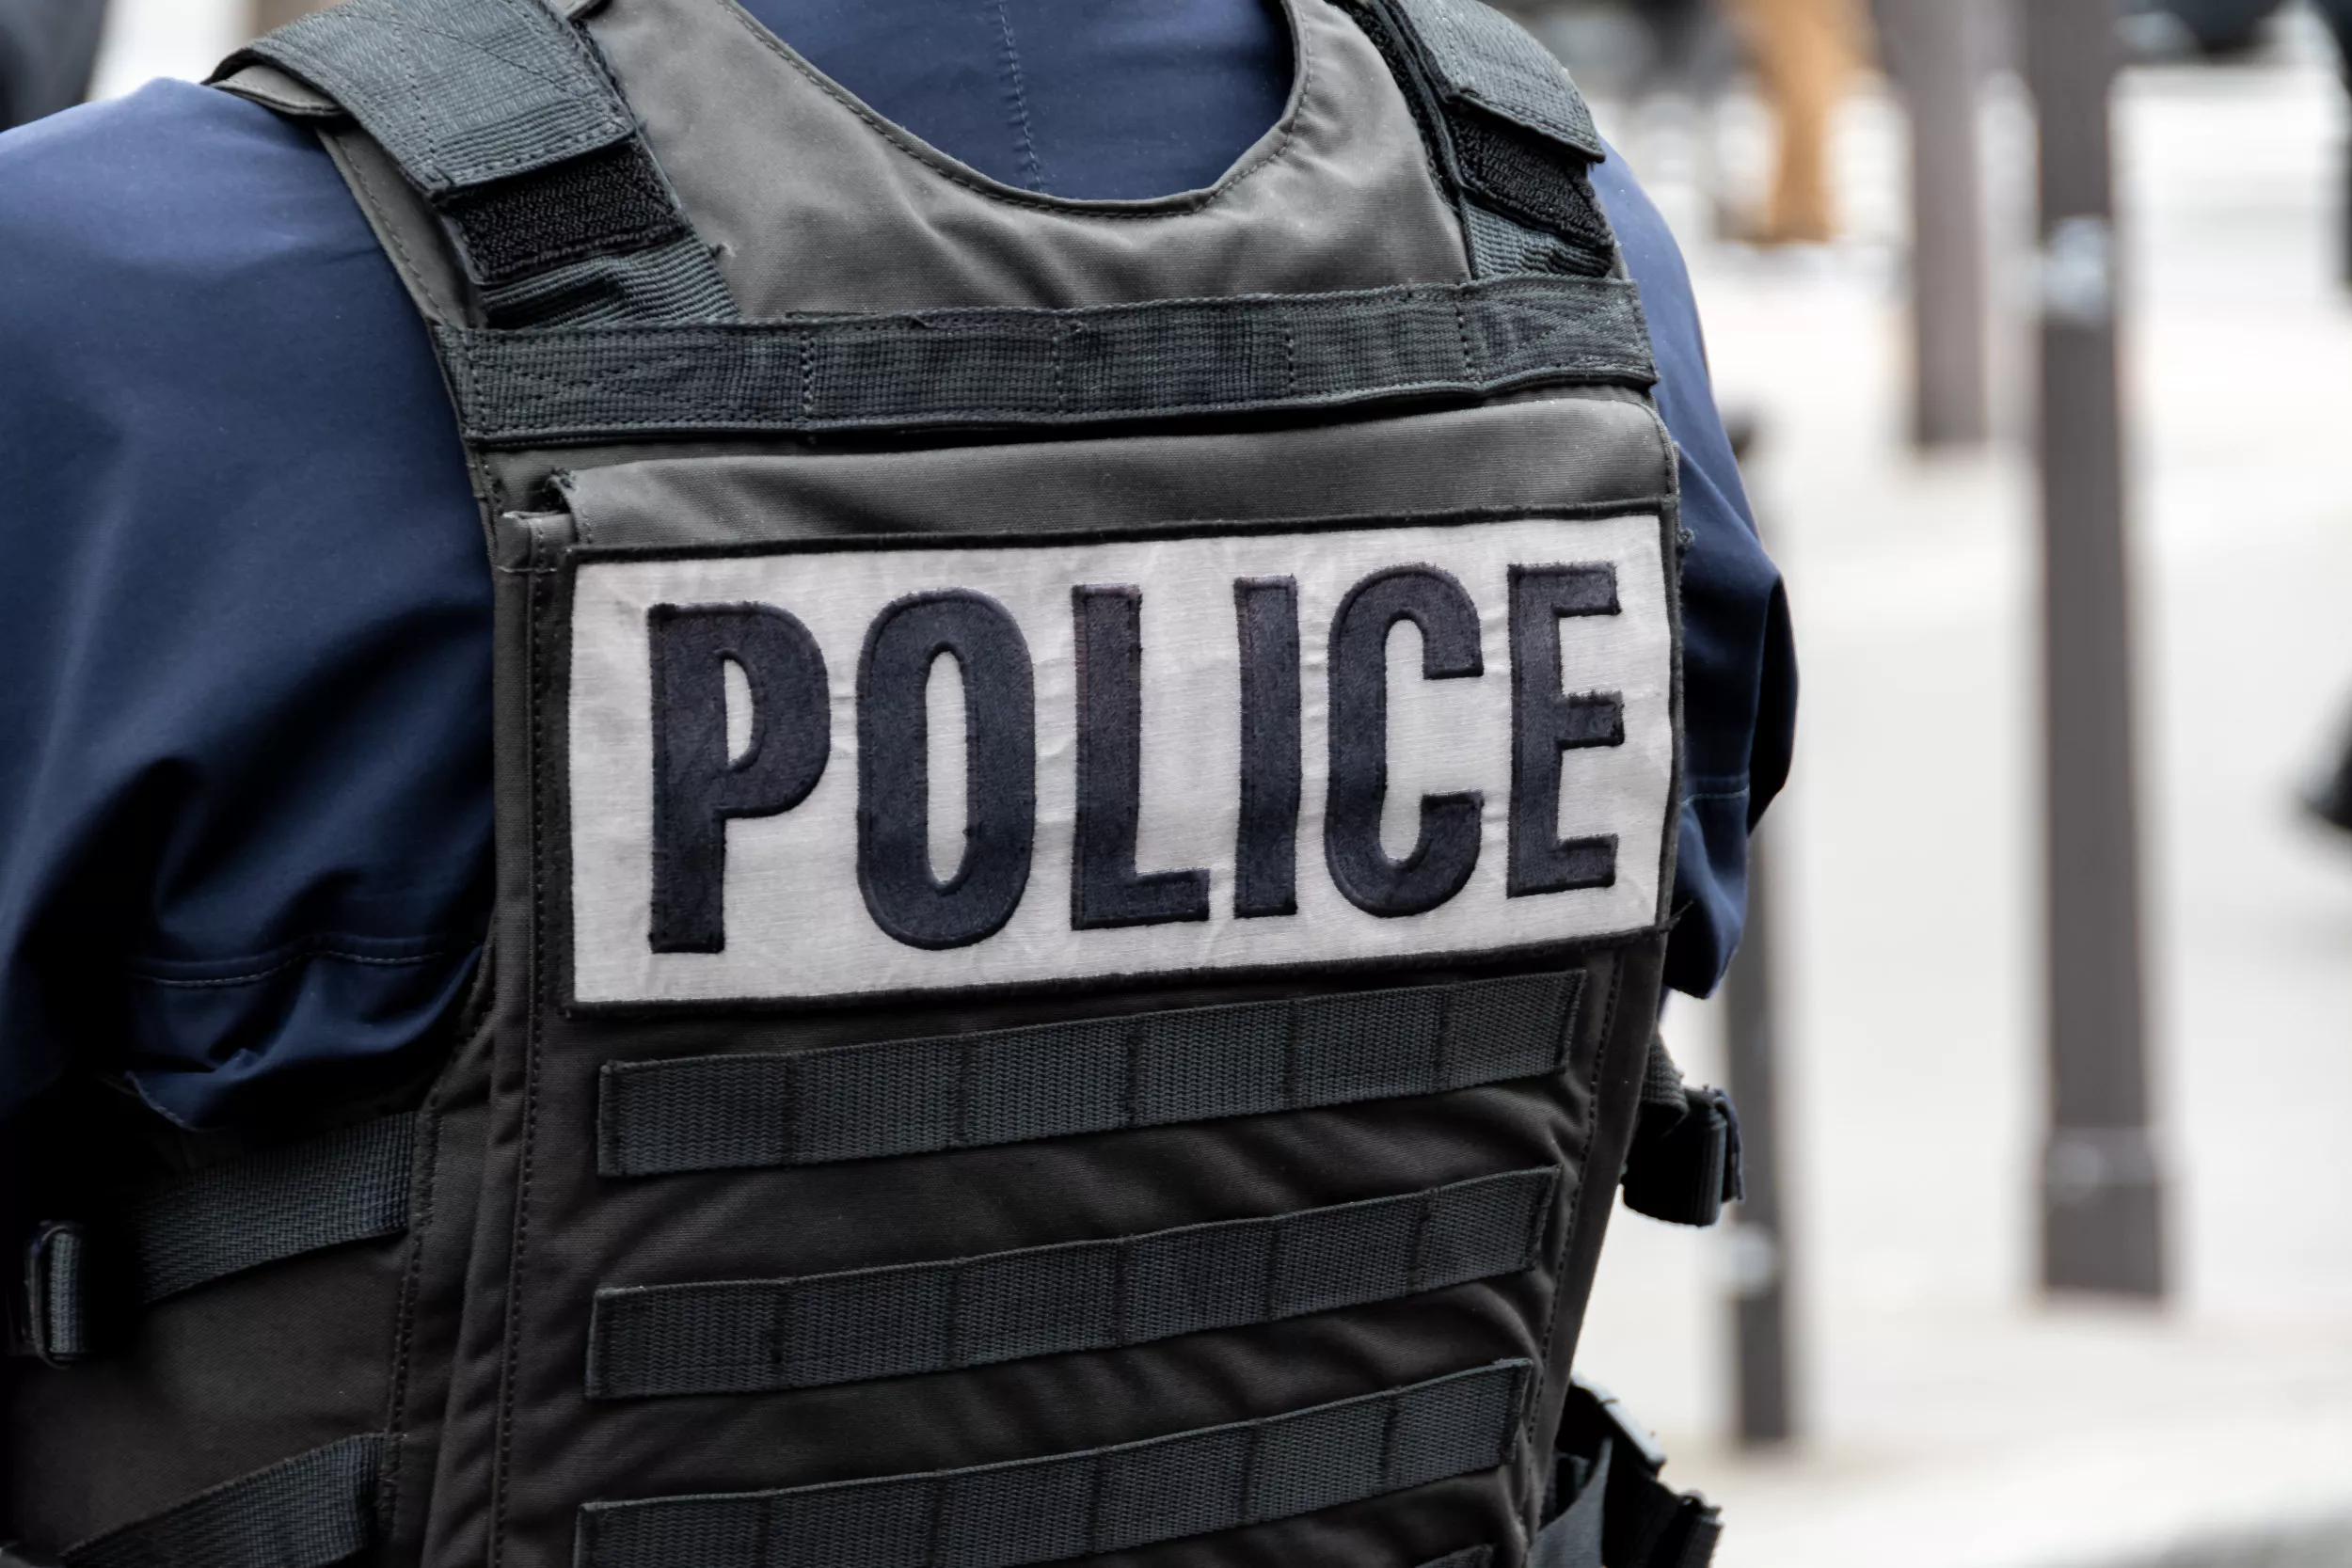 The 53-year-old woman called police in Germany, who in turn alerted their French colleagues